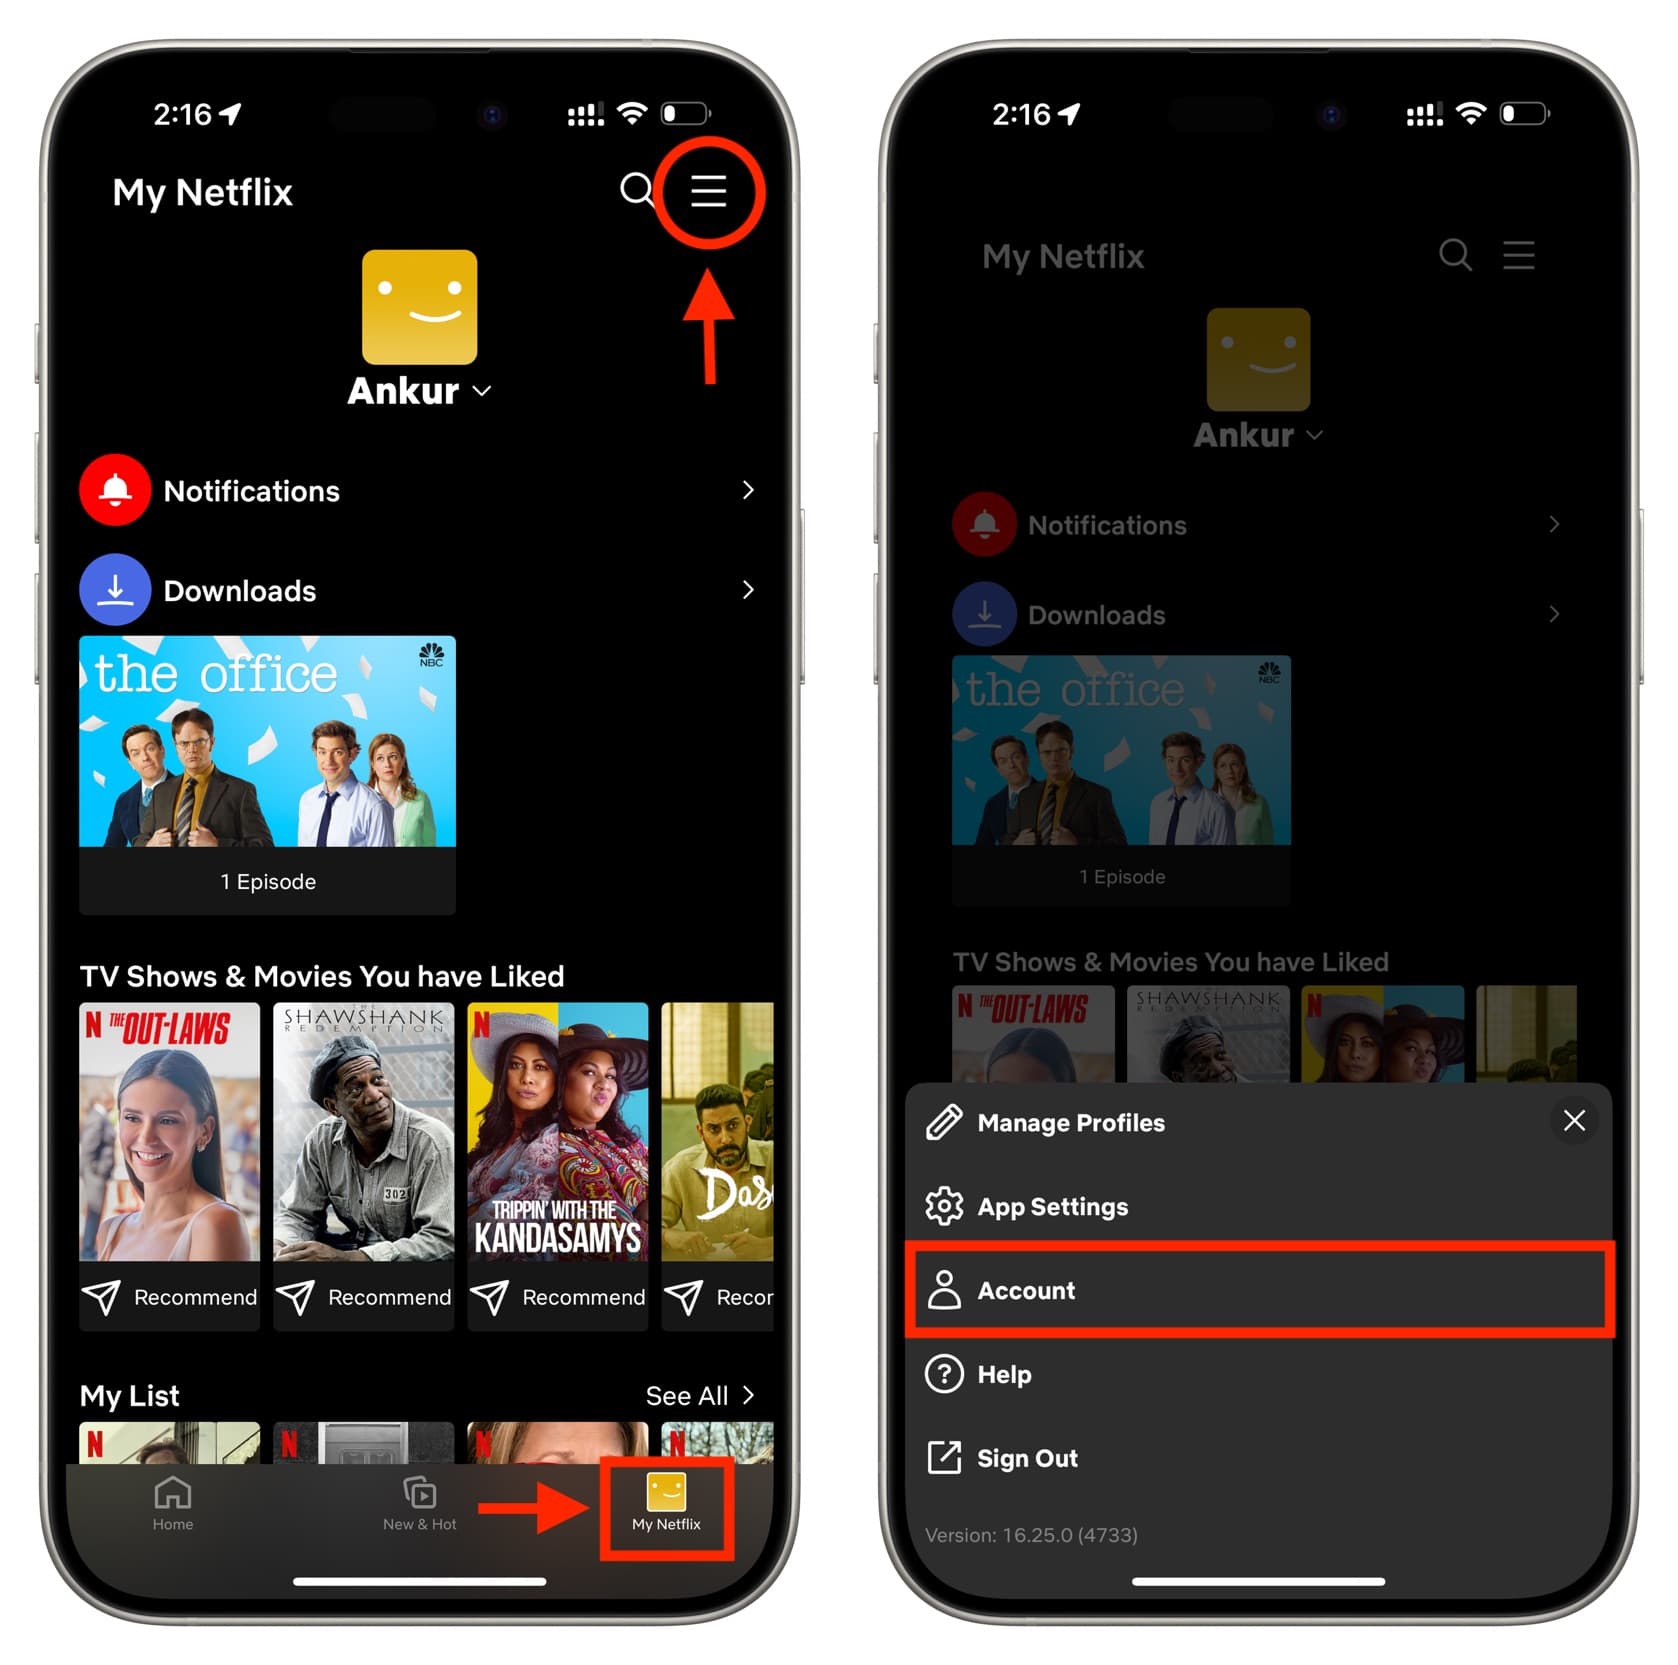 Go to your Netflix Account settings on iPhone